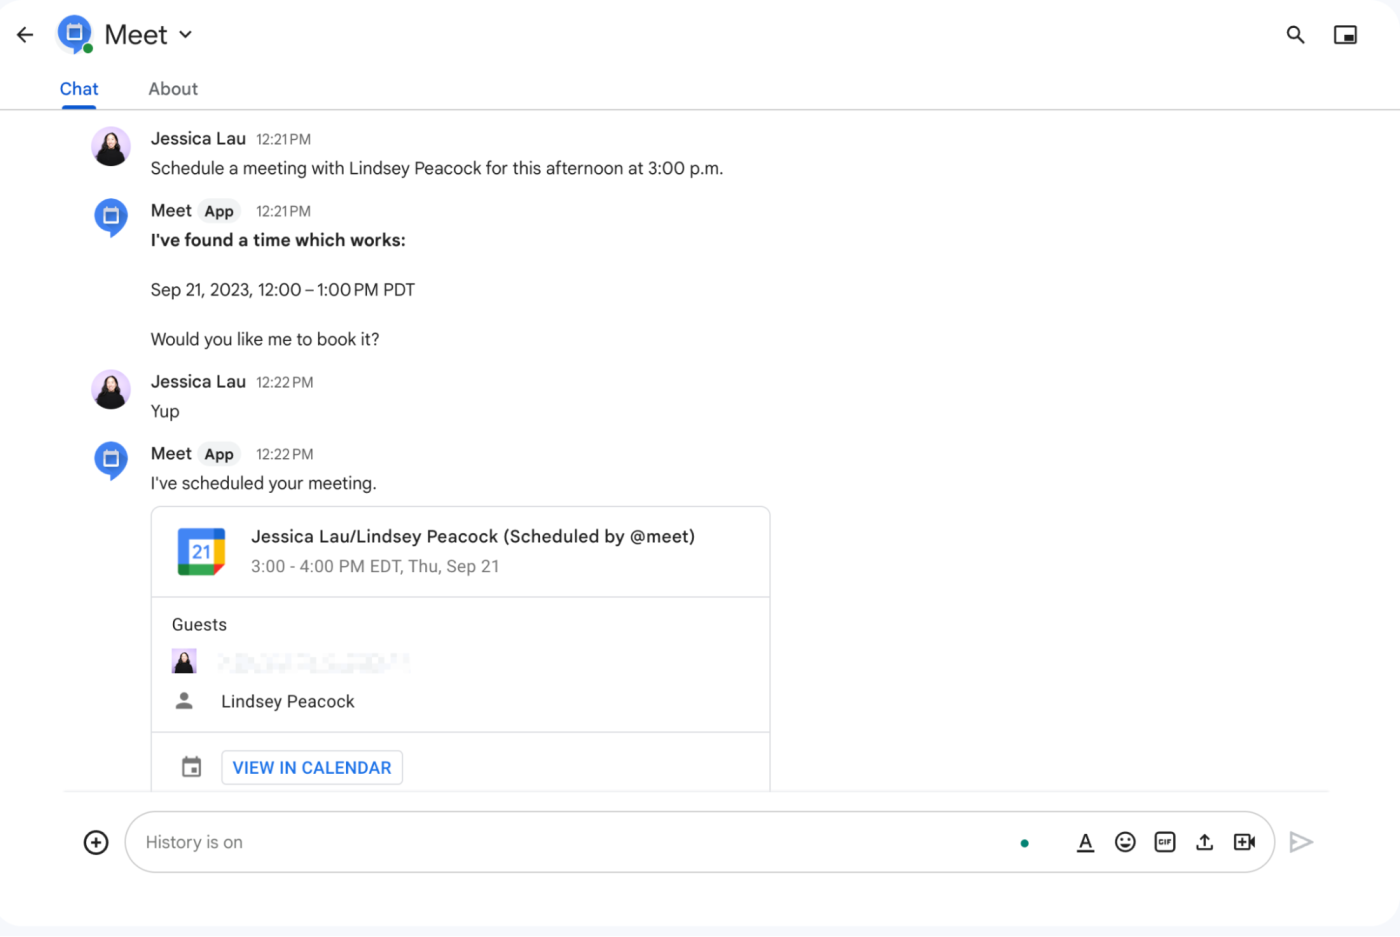 Example of how to use the Meet app chatbot in Google Chat to schedule a Google Calendar event.